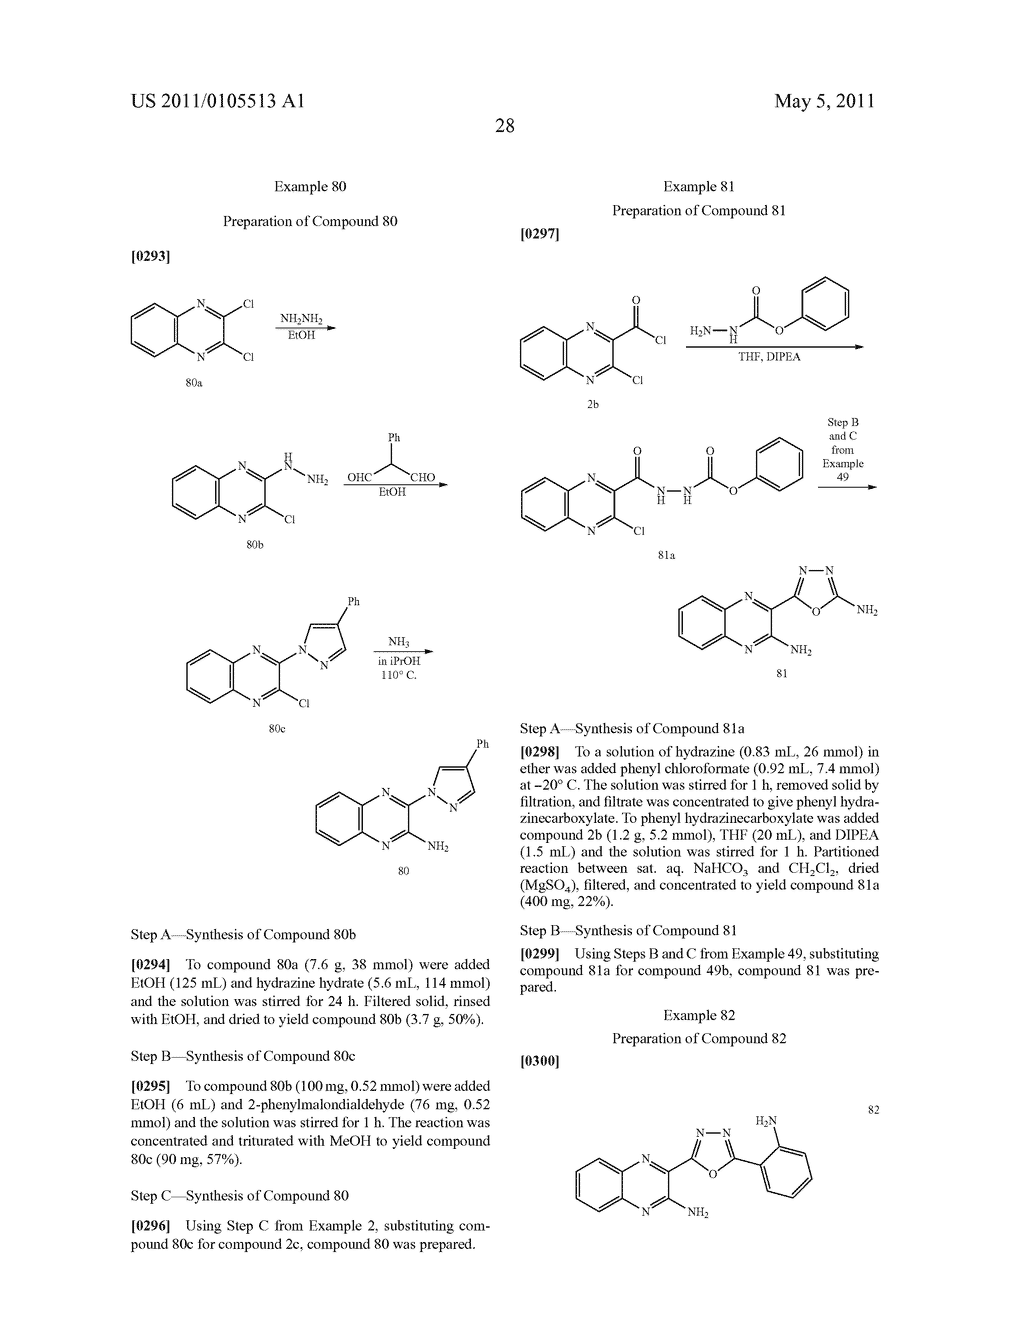 AMINO-QUINOXALINE AND AMINO-QUINOLINE COMPOUNDS FOR USE AS ADENOSINE A2a RECEPTOR ANTAGONISTS - diagram, schematic, and image 29